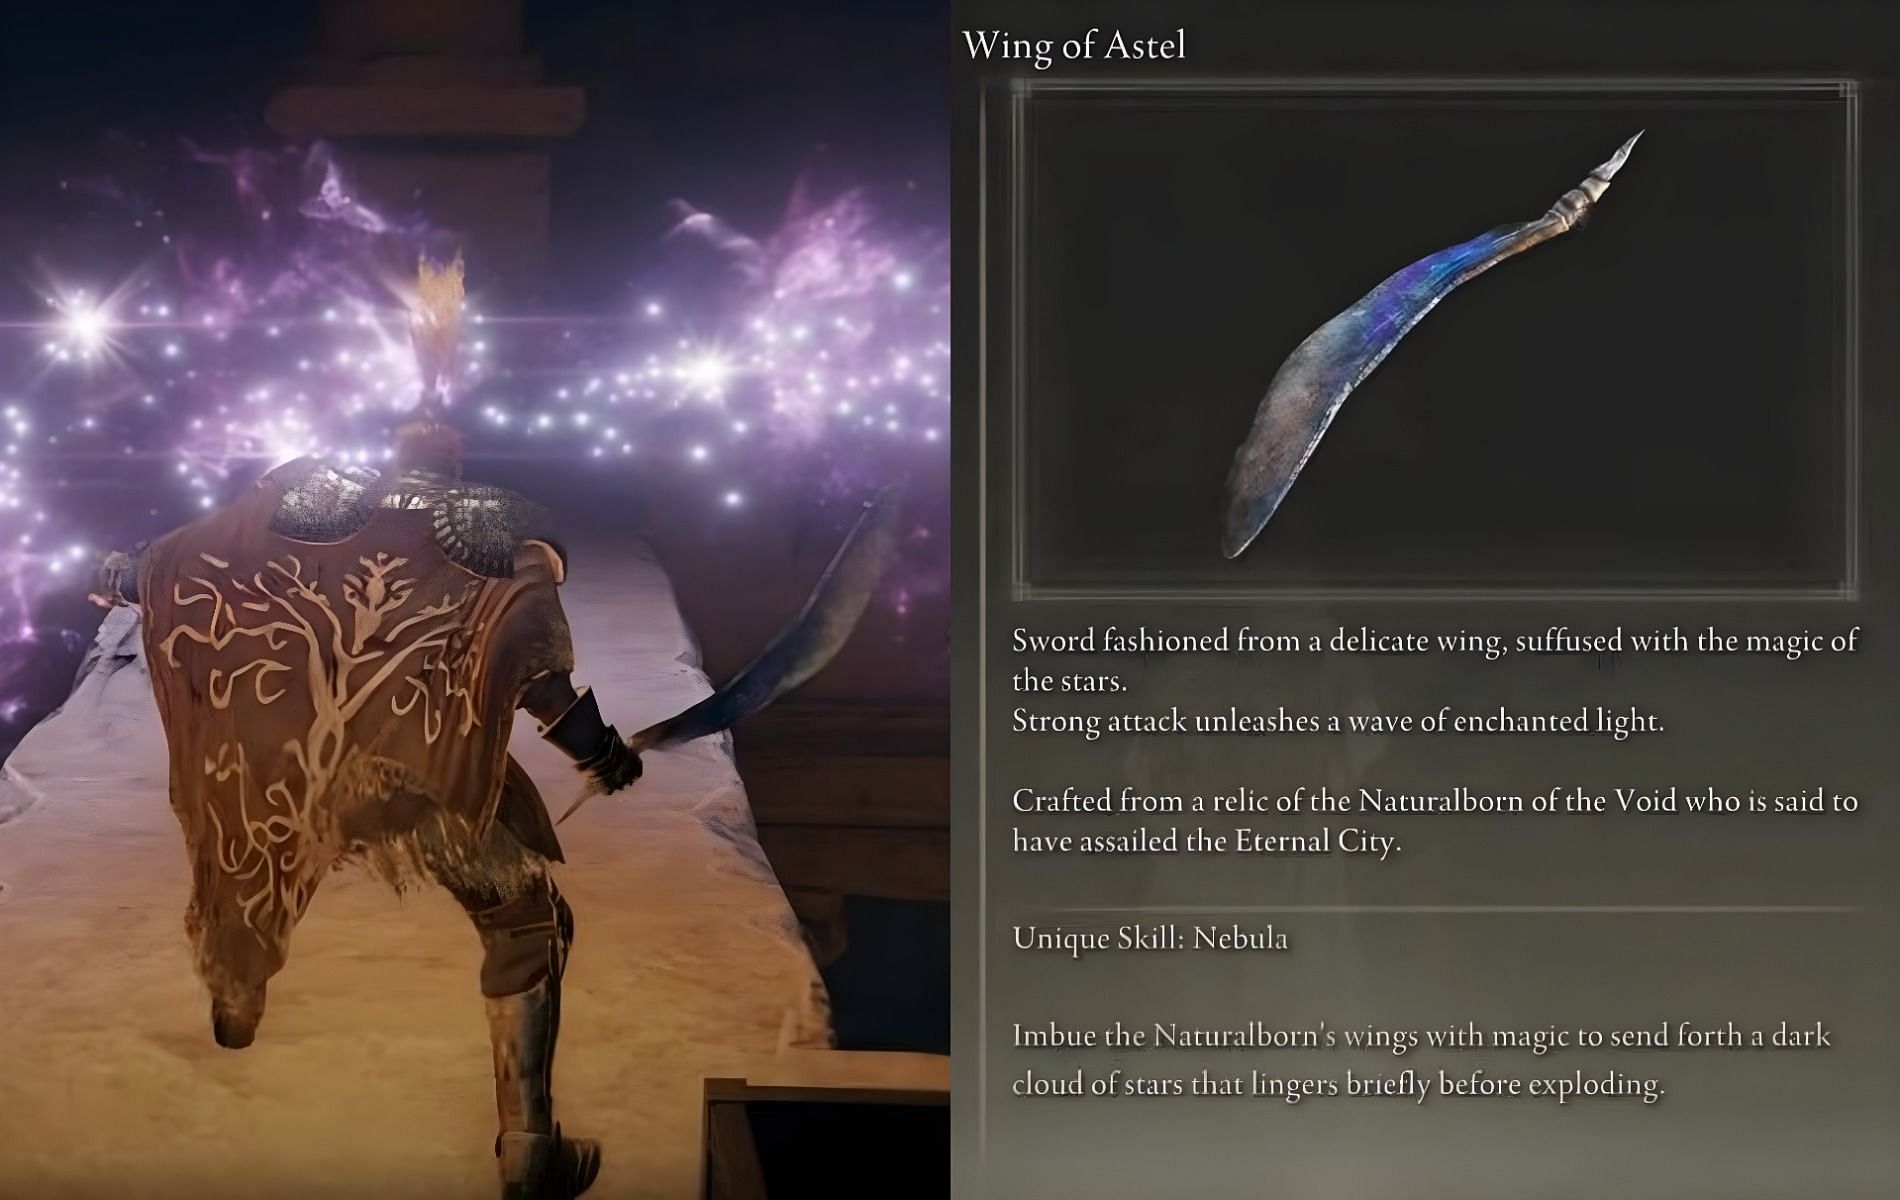 How to obtain the Wing of Astel in Elden Ring